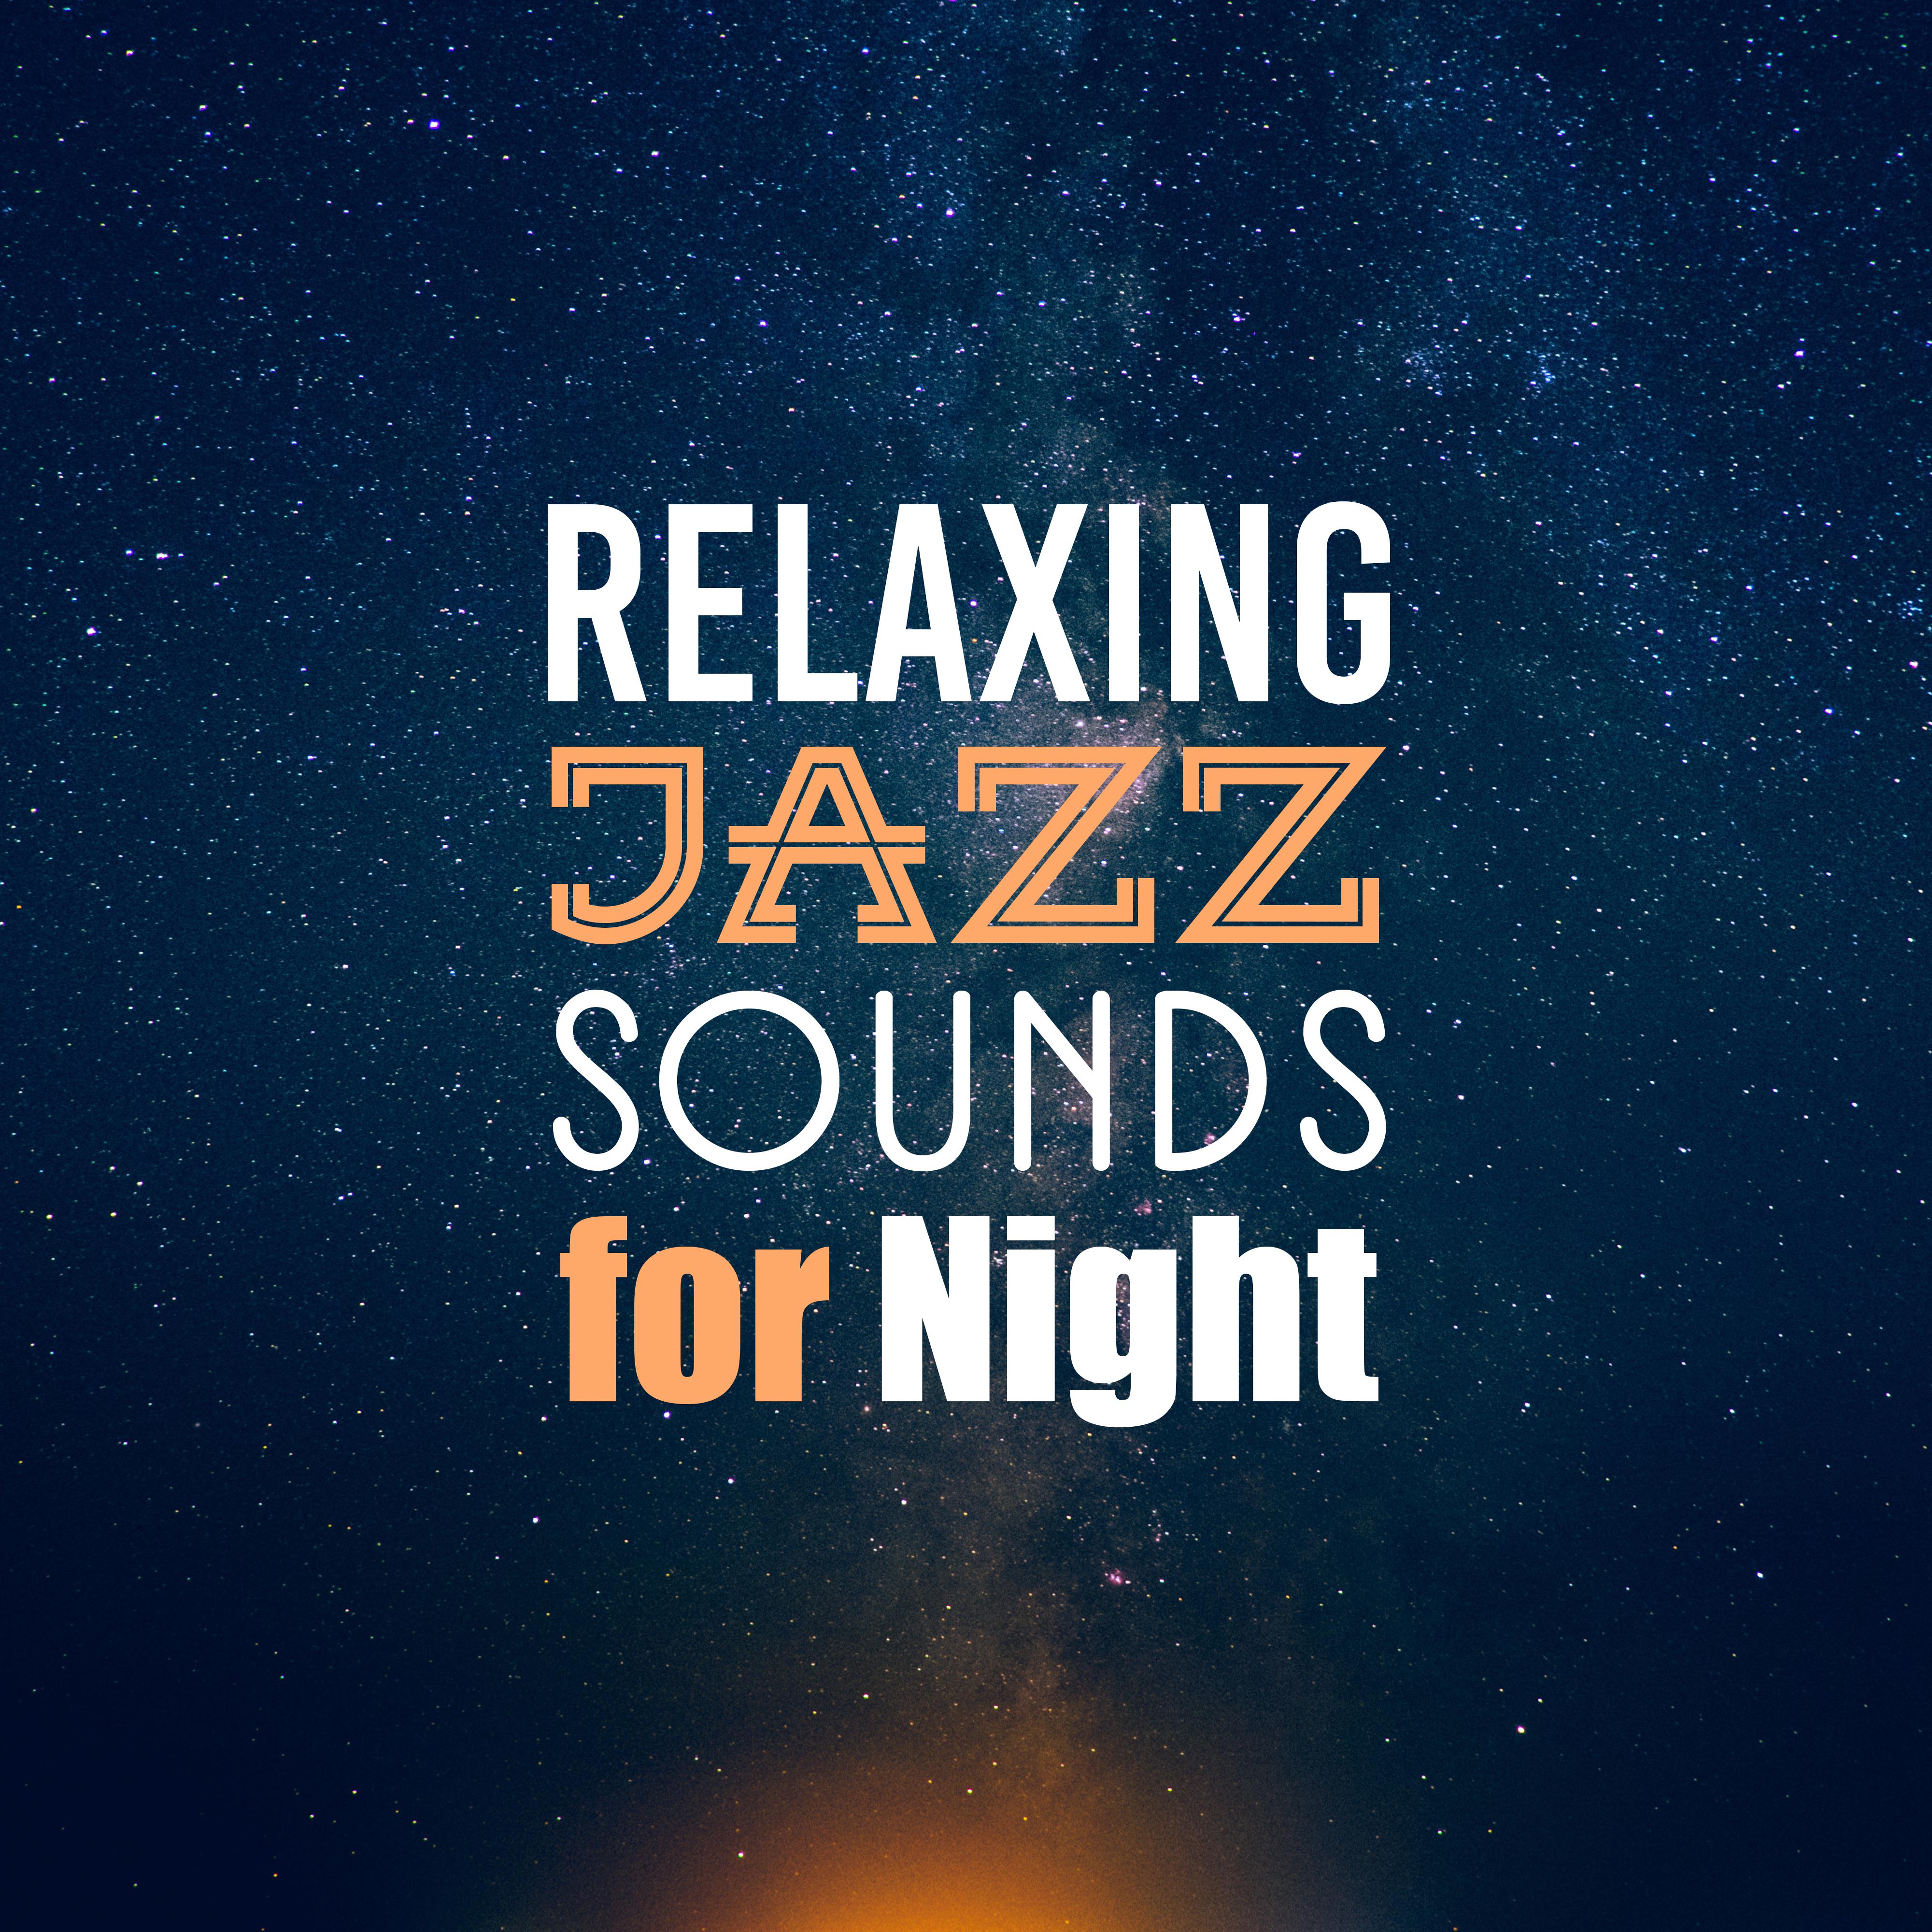 Relaxing Jazz Sounds for Night